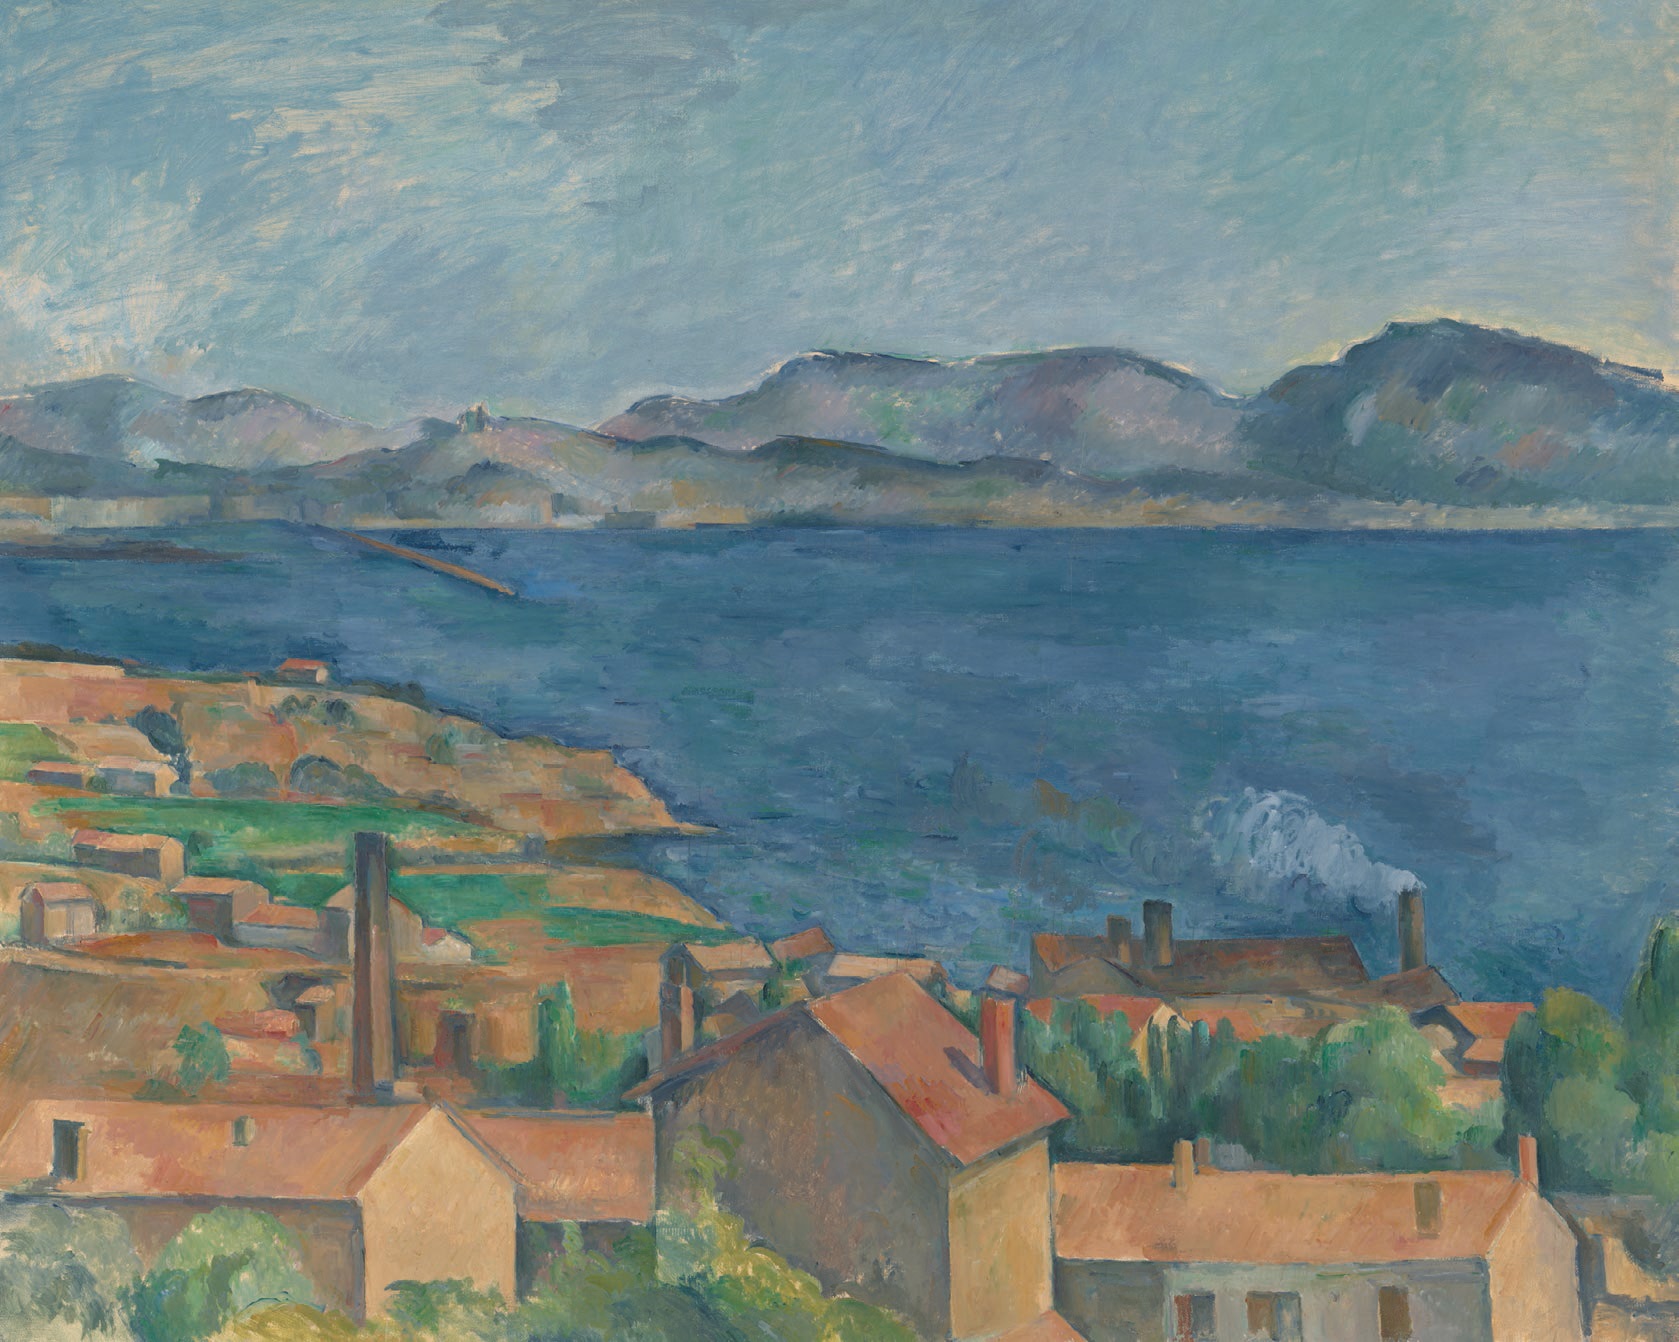 Paul Cezanne, “The Bay of Marseille, Seen from L’Estaque” (about 1885, oil on canvas), 31 5/8 inches by 39 5/8 inches, The Art Institute of Chicago, Mr. and Mrs. Martin A. Ryerson Collection, 1933.1116 PHOTO: COURTESY OF THE ART INSTITUTE OF CHICAGO